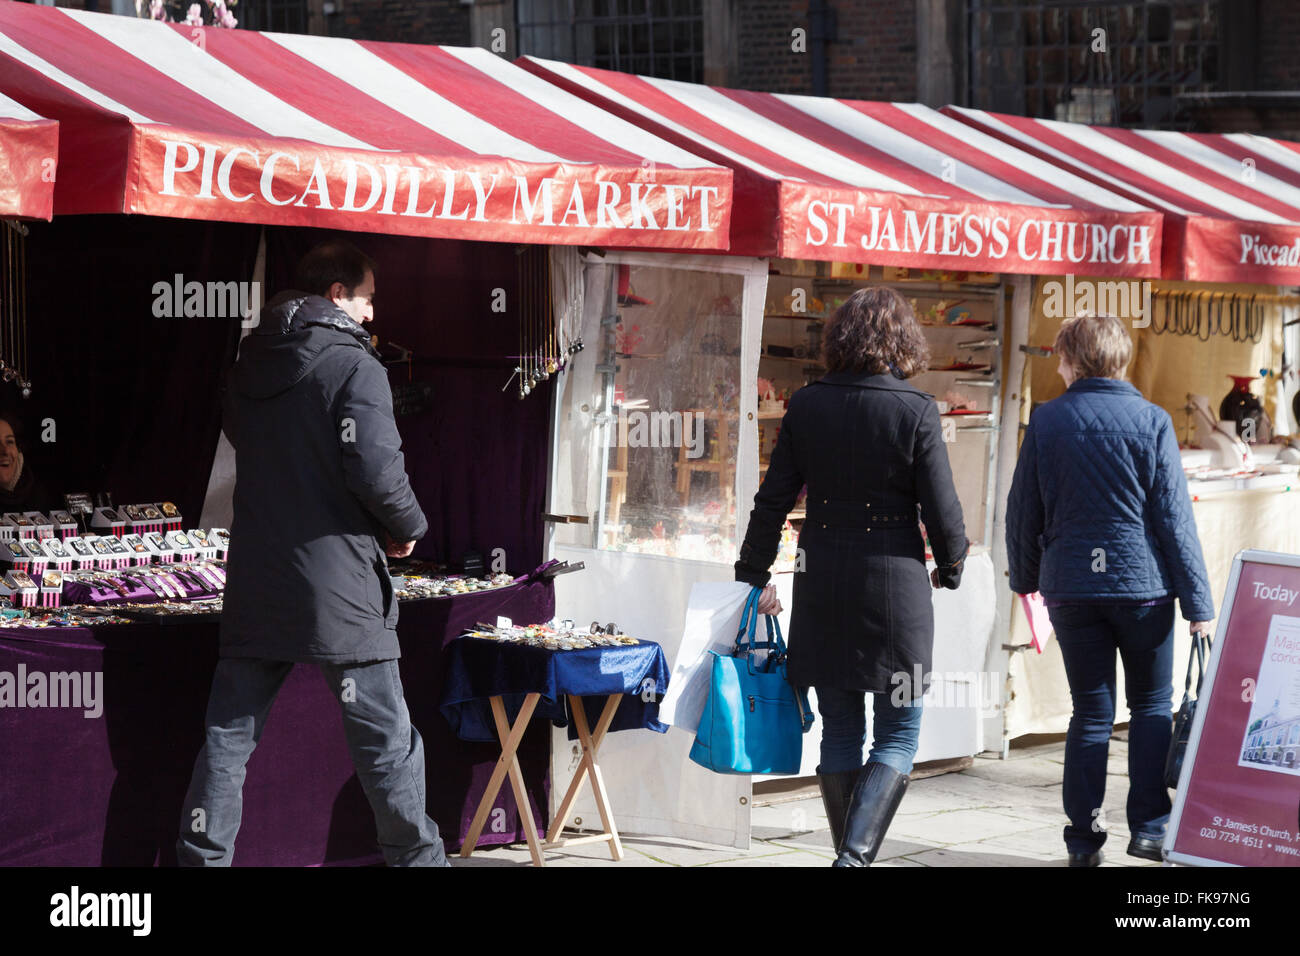 People shopping at the stalls, Piccadilly Market, St James Church, Piccadilly London UK Stock Photo